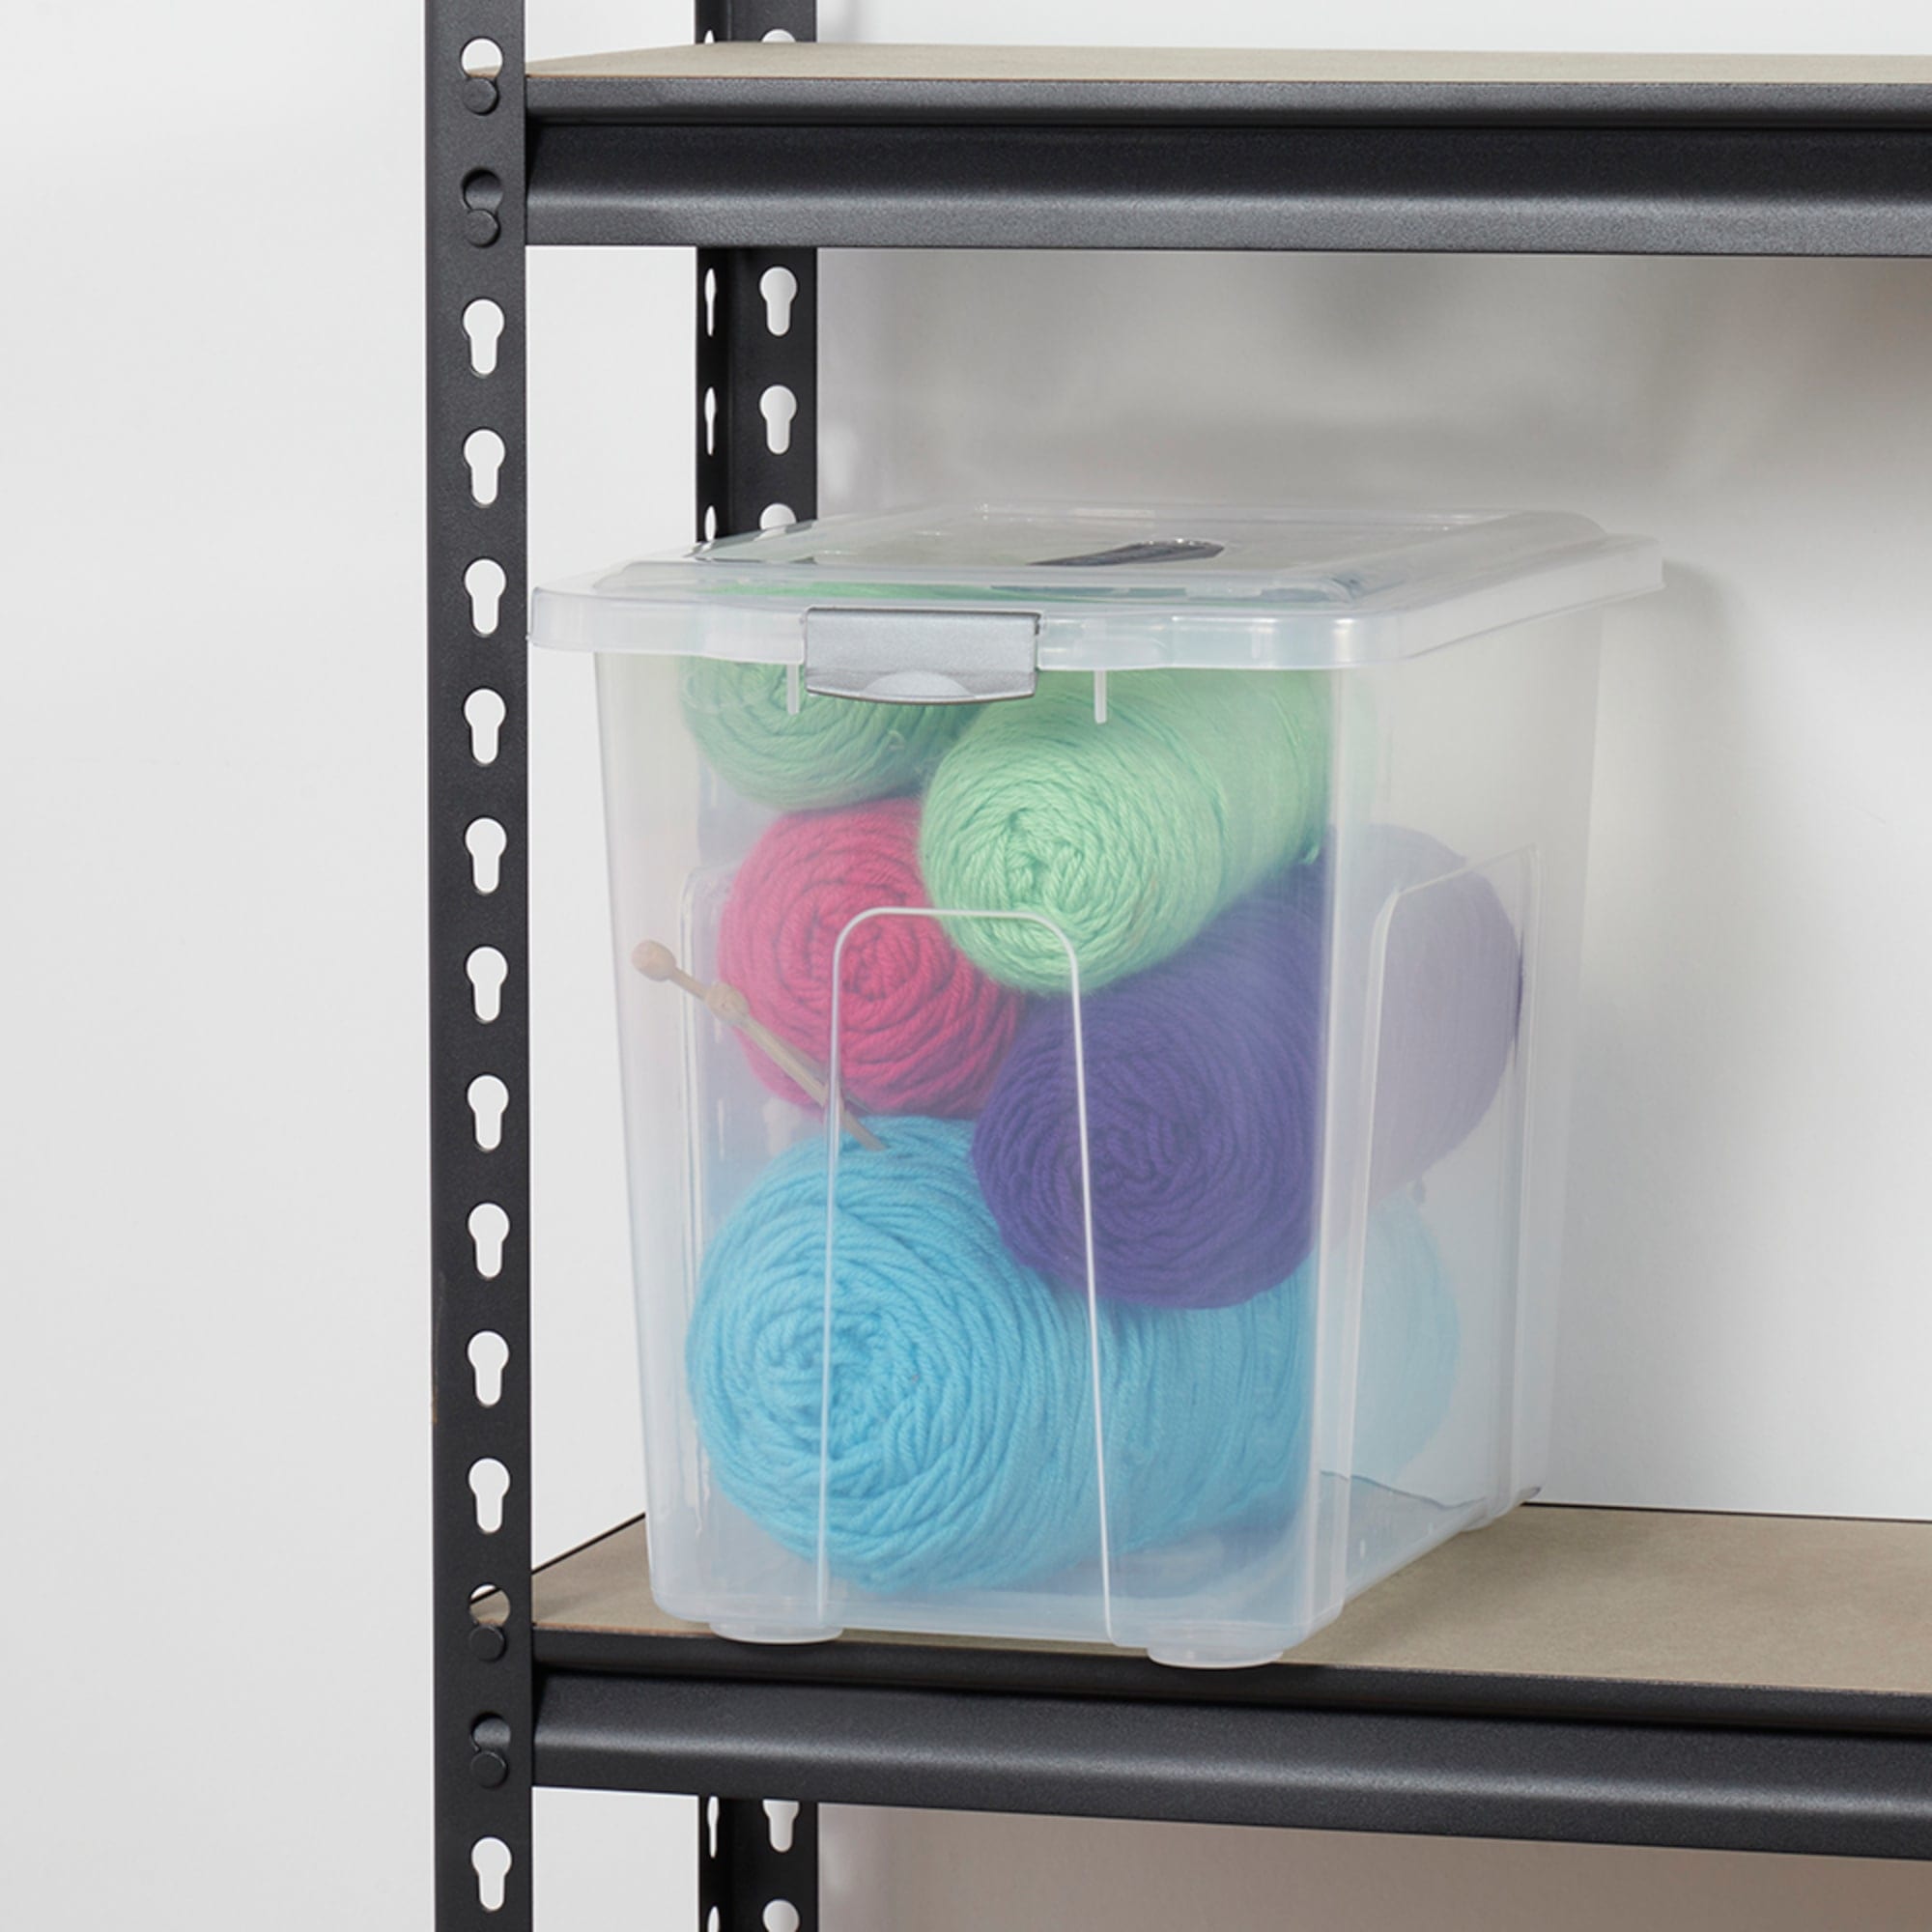 Home Basics 23.5 Liter Storage Box With Handle, Clear $10.00 EACH, CASE PACK OF 5